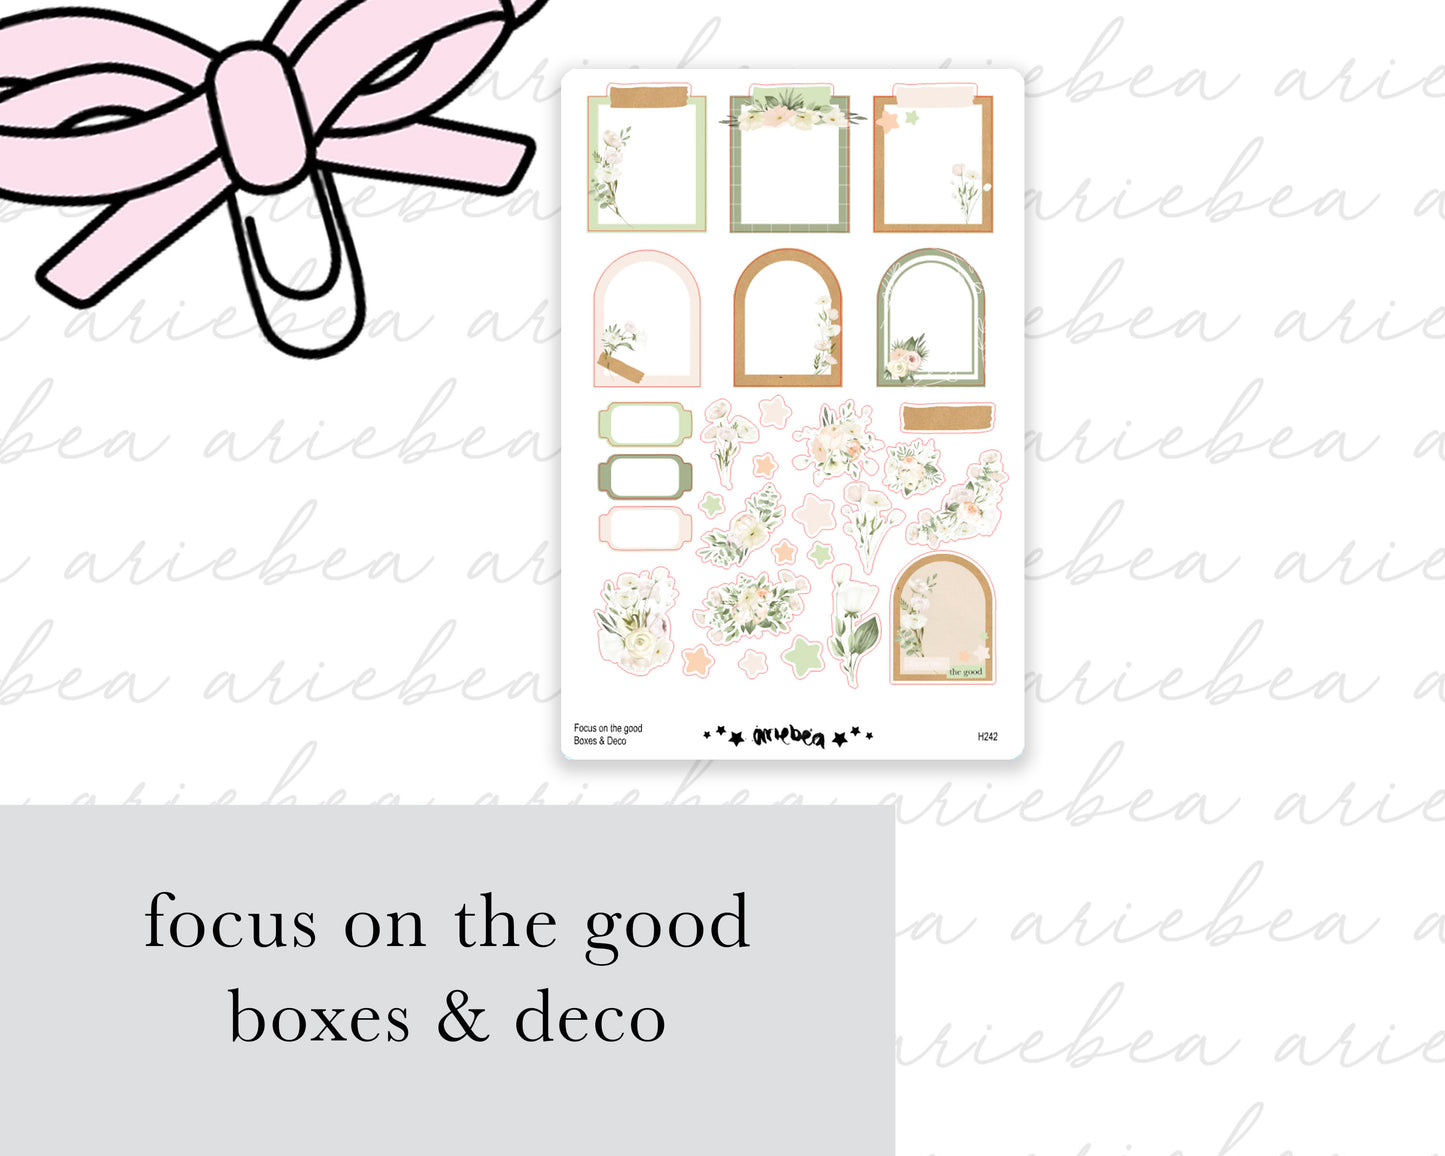 Focus On The Good Boxes & Deco